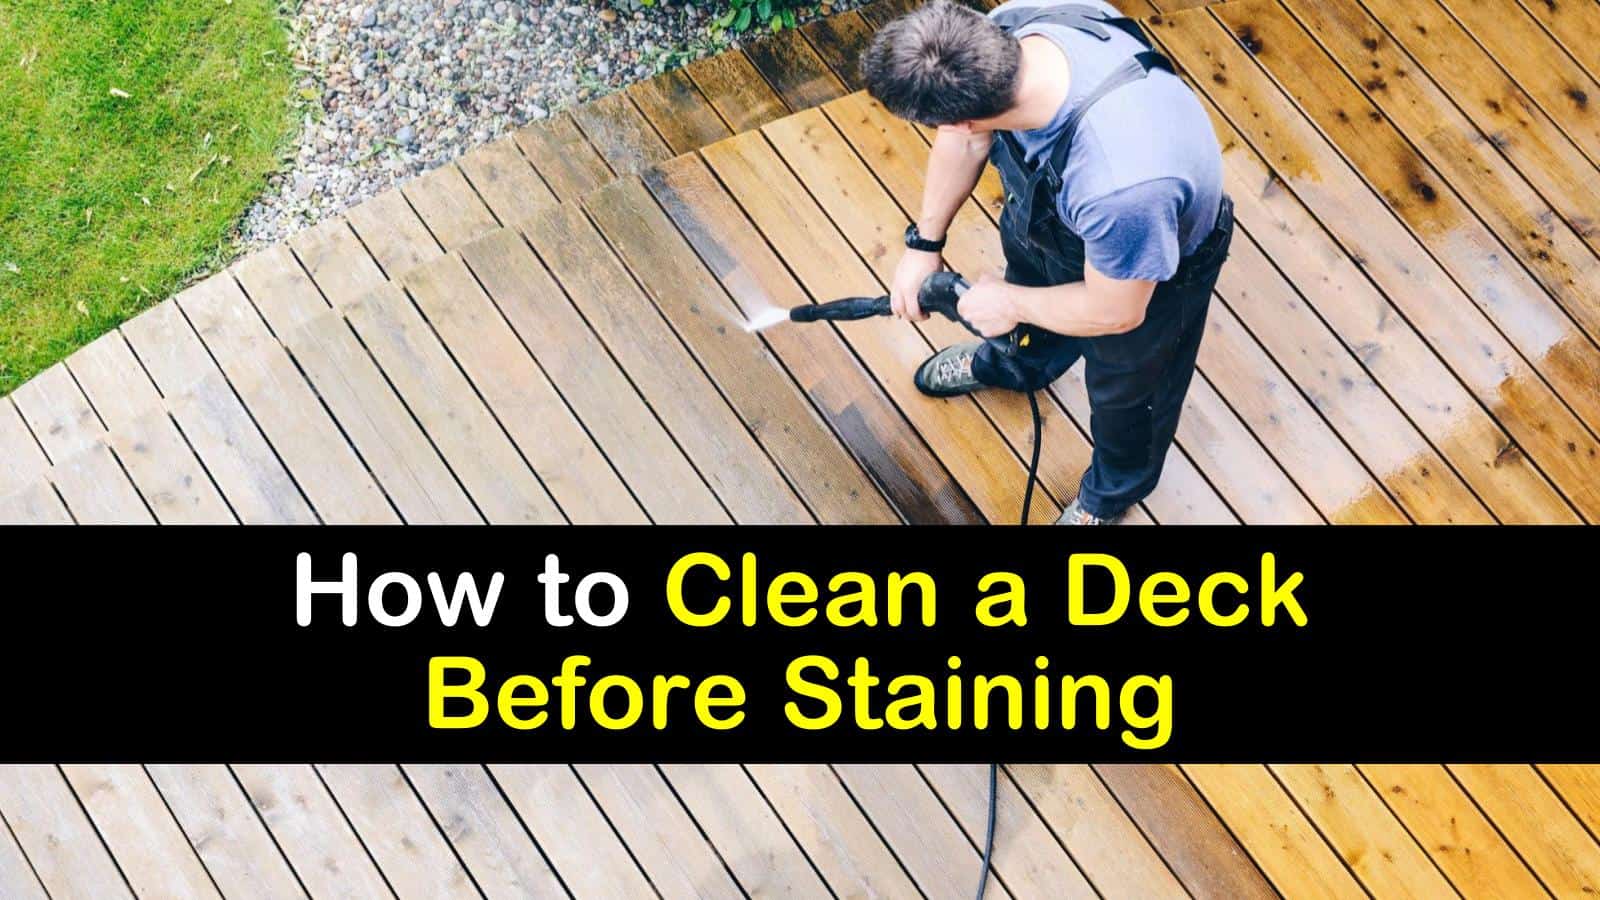 how to clean a deck before staining titleimg1